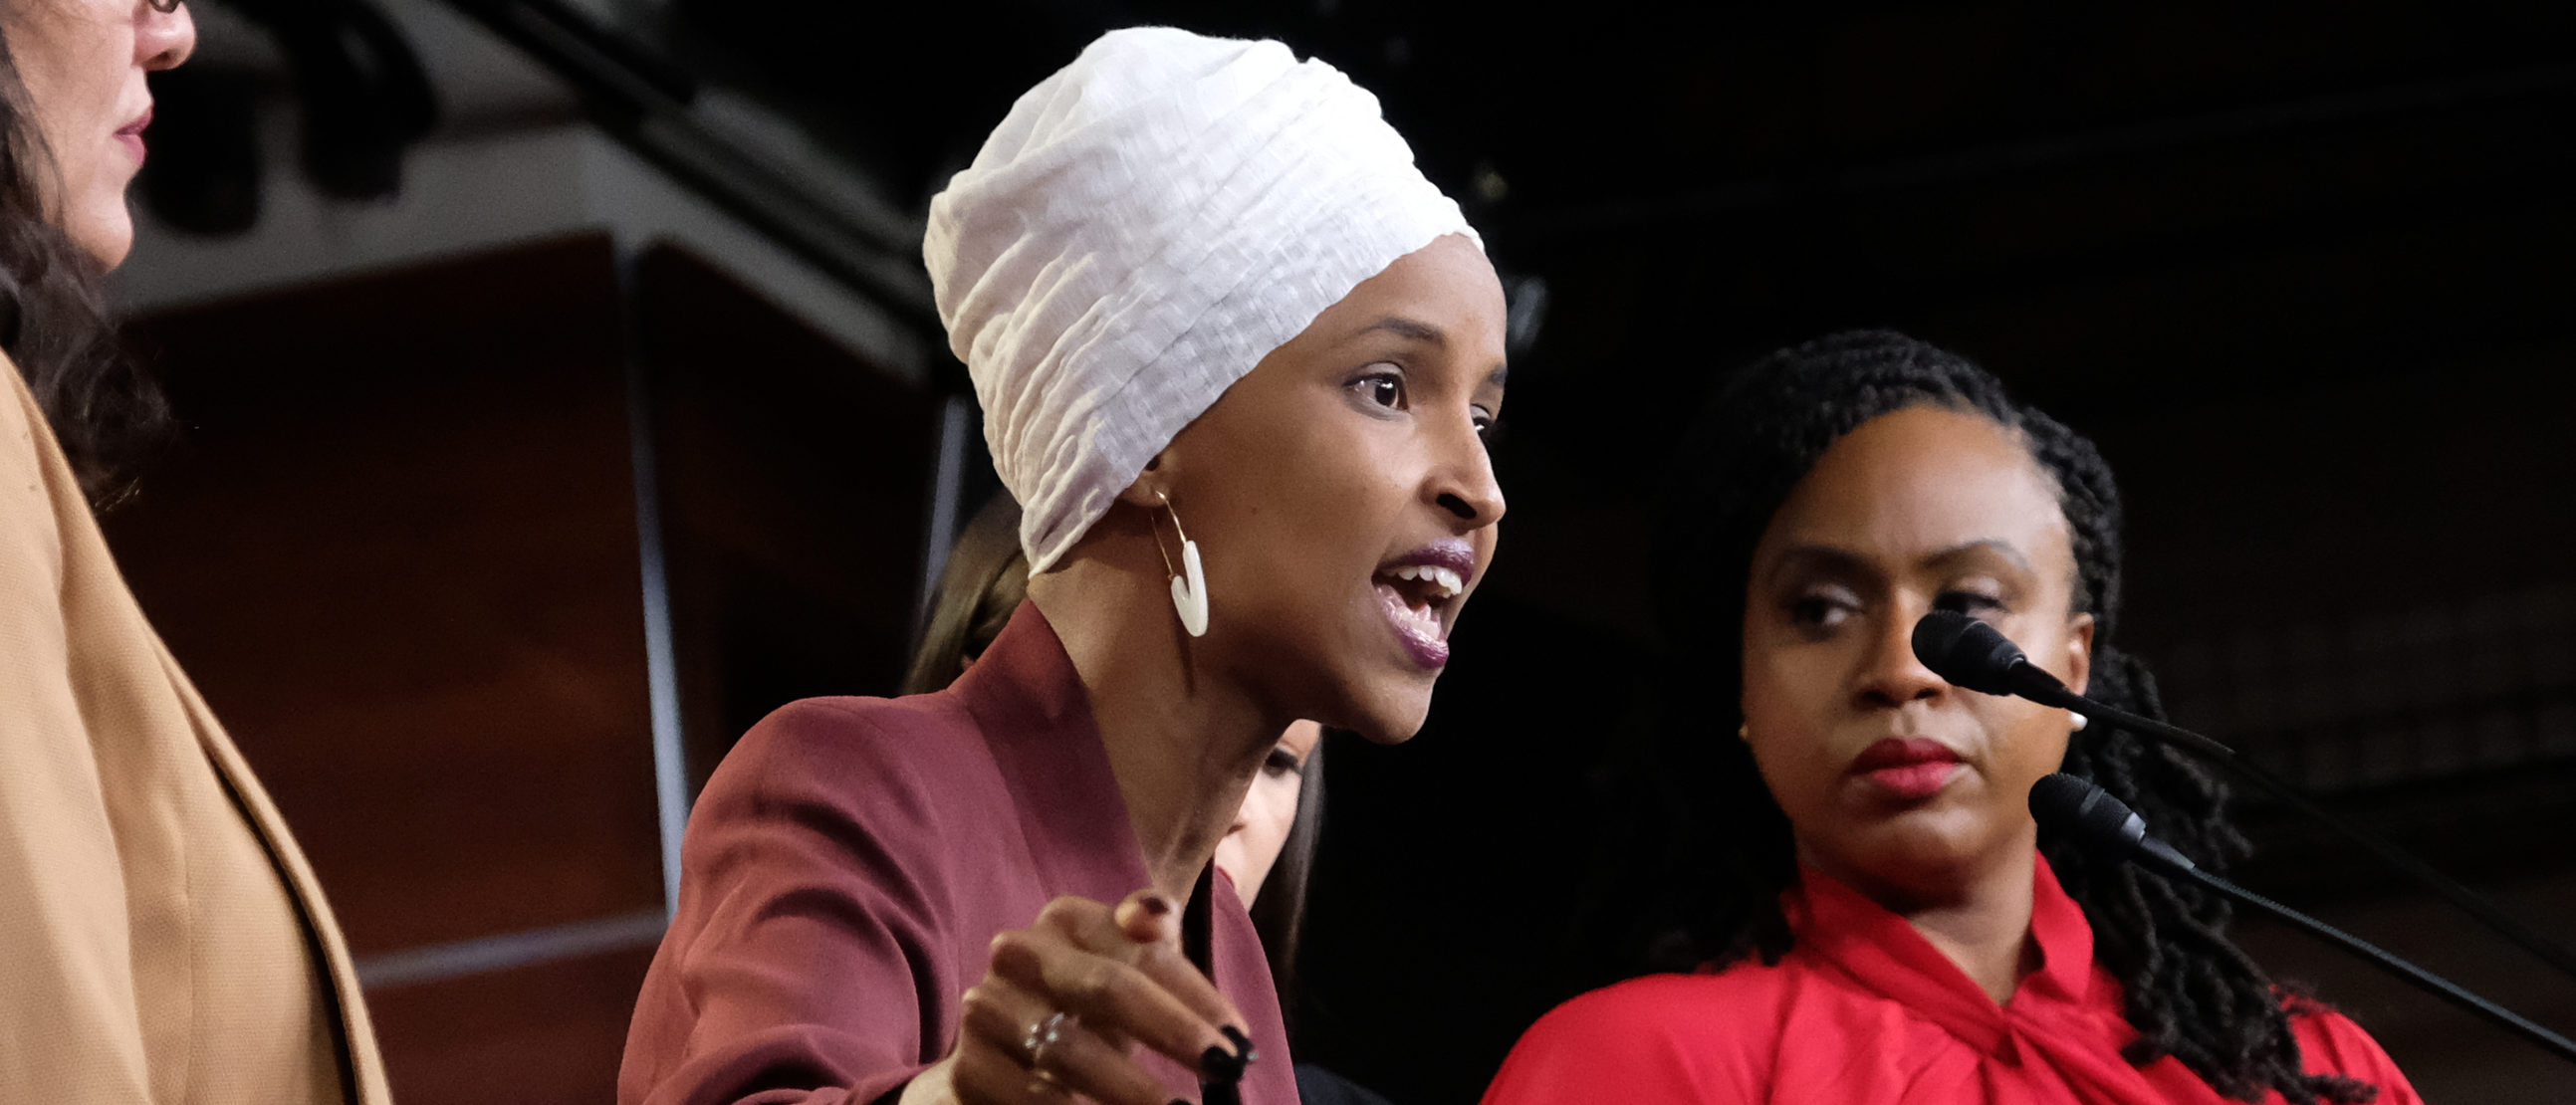 Ilhan Omar speaks as Reps. Ayanna Pressley and Rashida Tlaib listen during a news conference at the US Capitol on July 15, 2019 in Washington, D.C. (Photo by Alex Wroblewski/Getty Images)